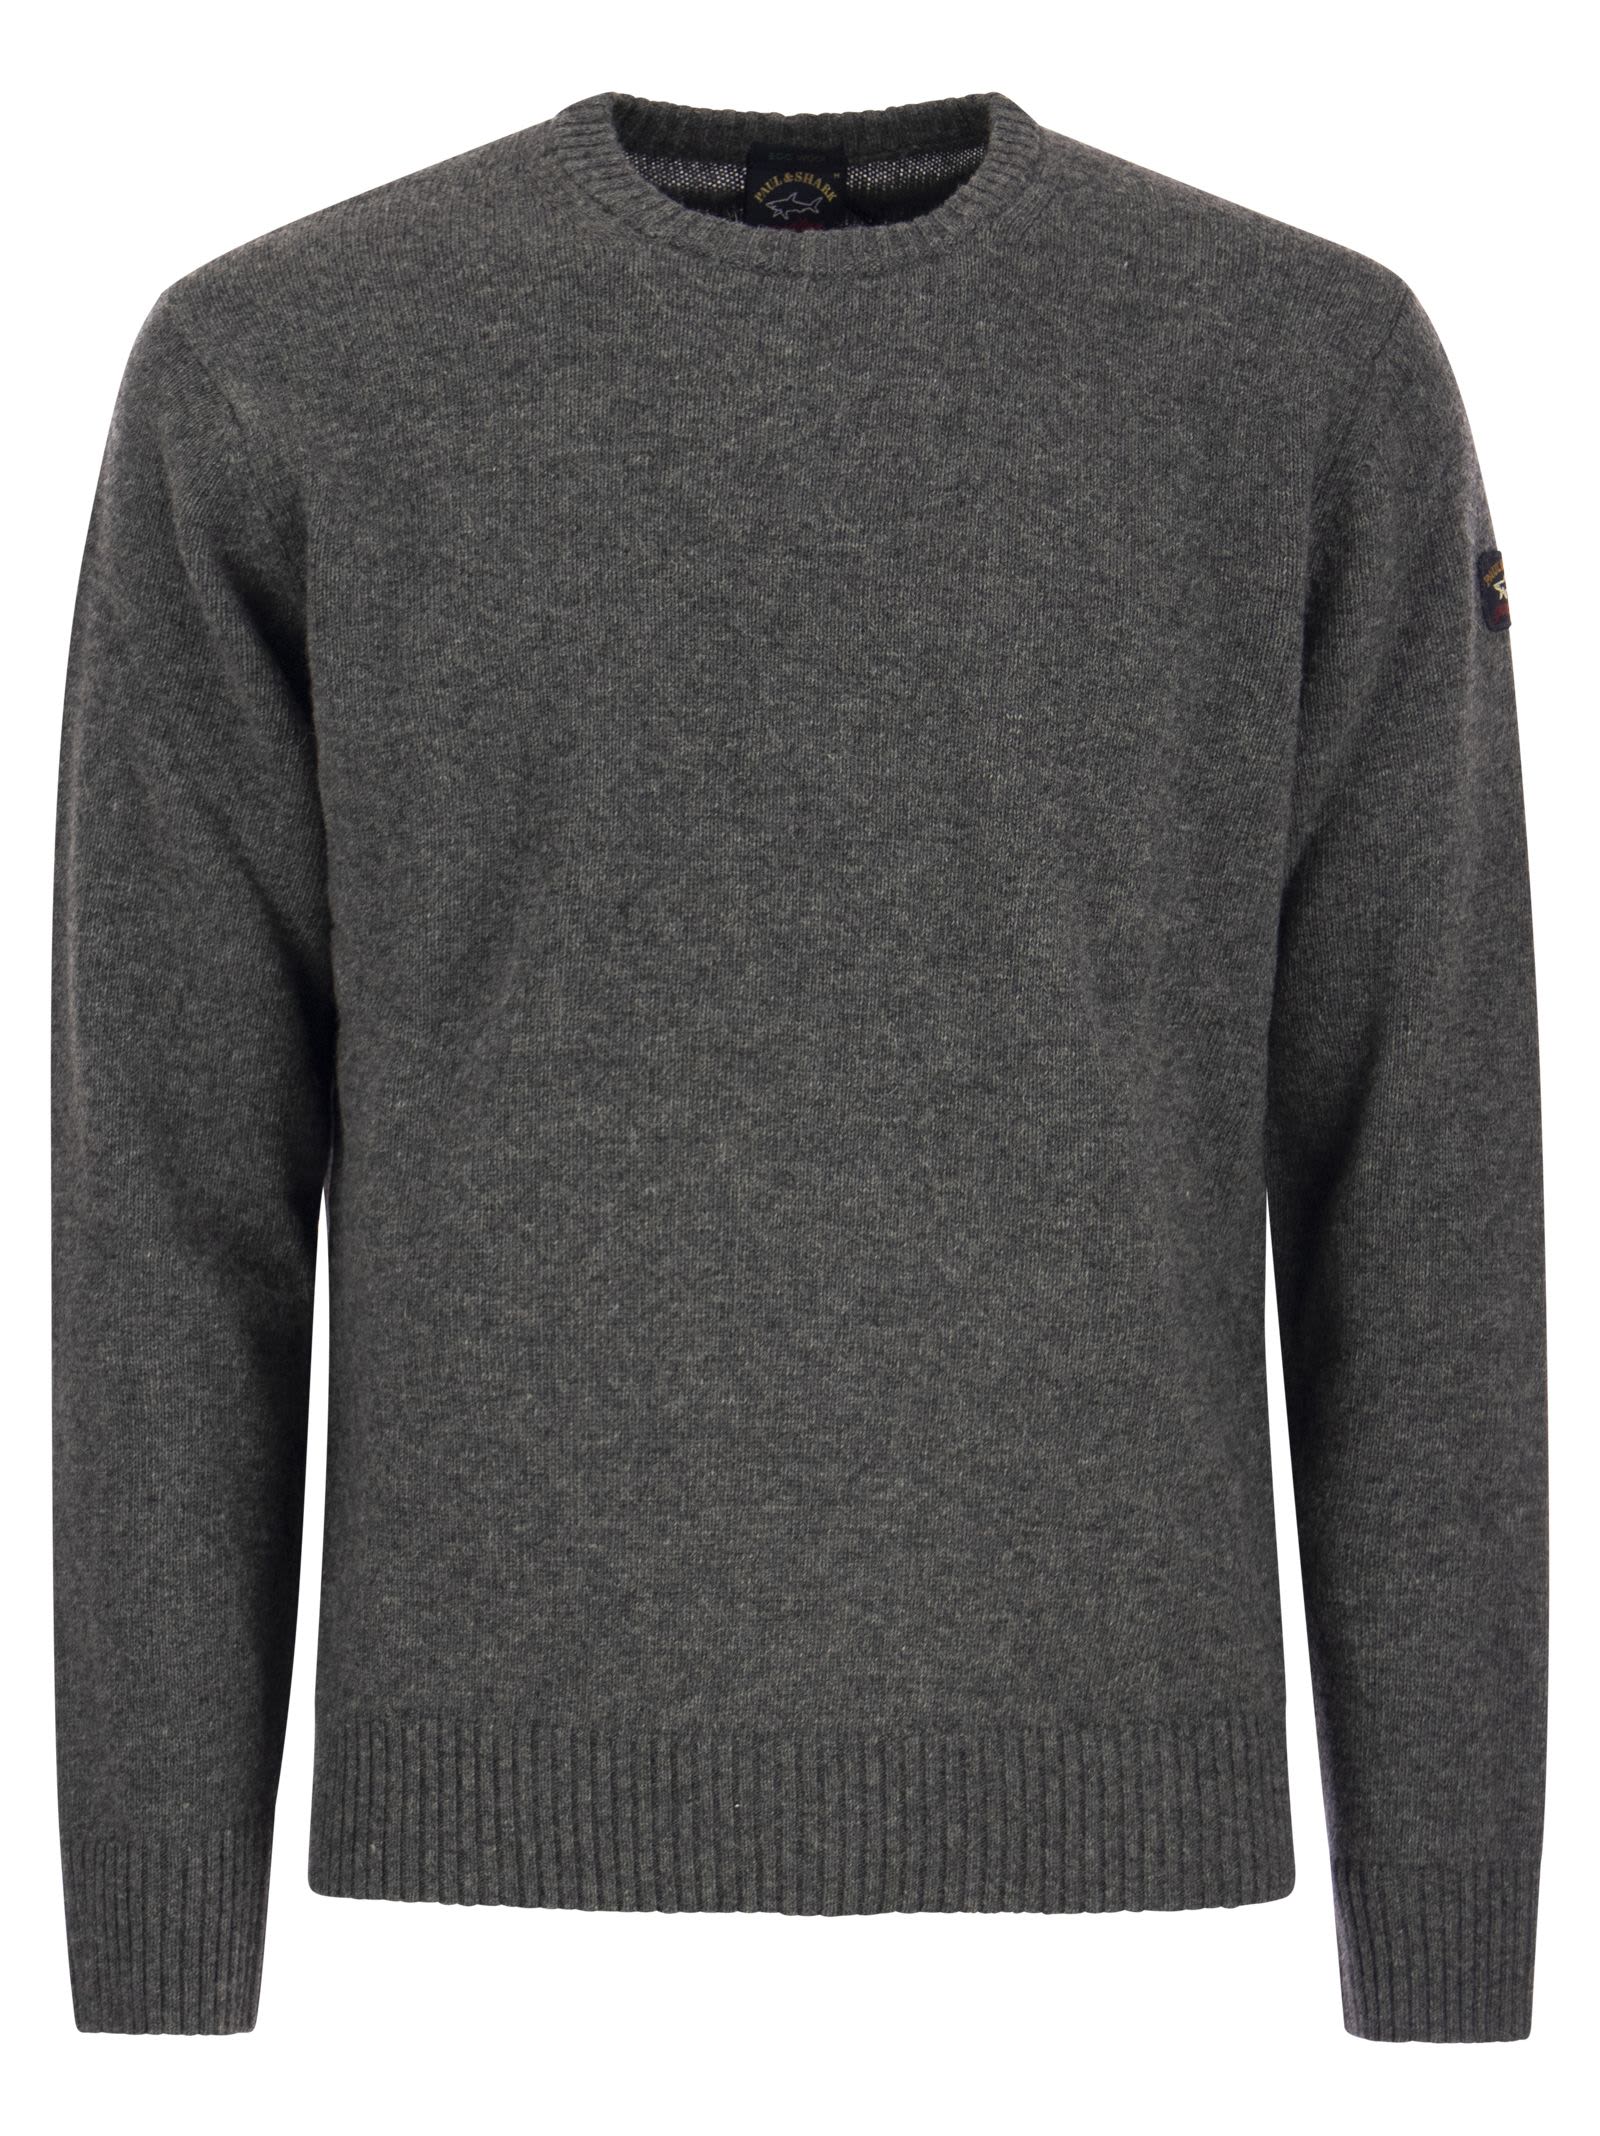 Wool Crew Neck With Arm Patch Paul & Shark